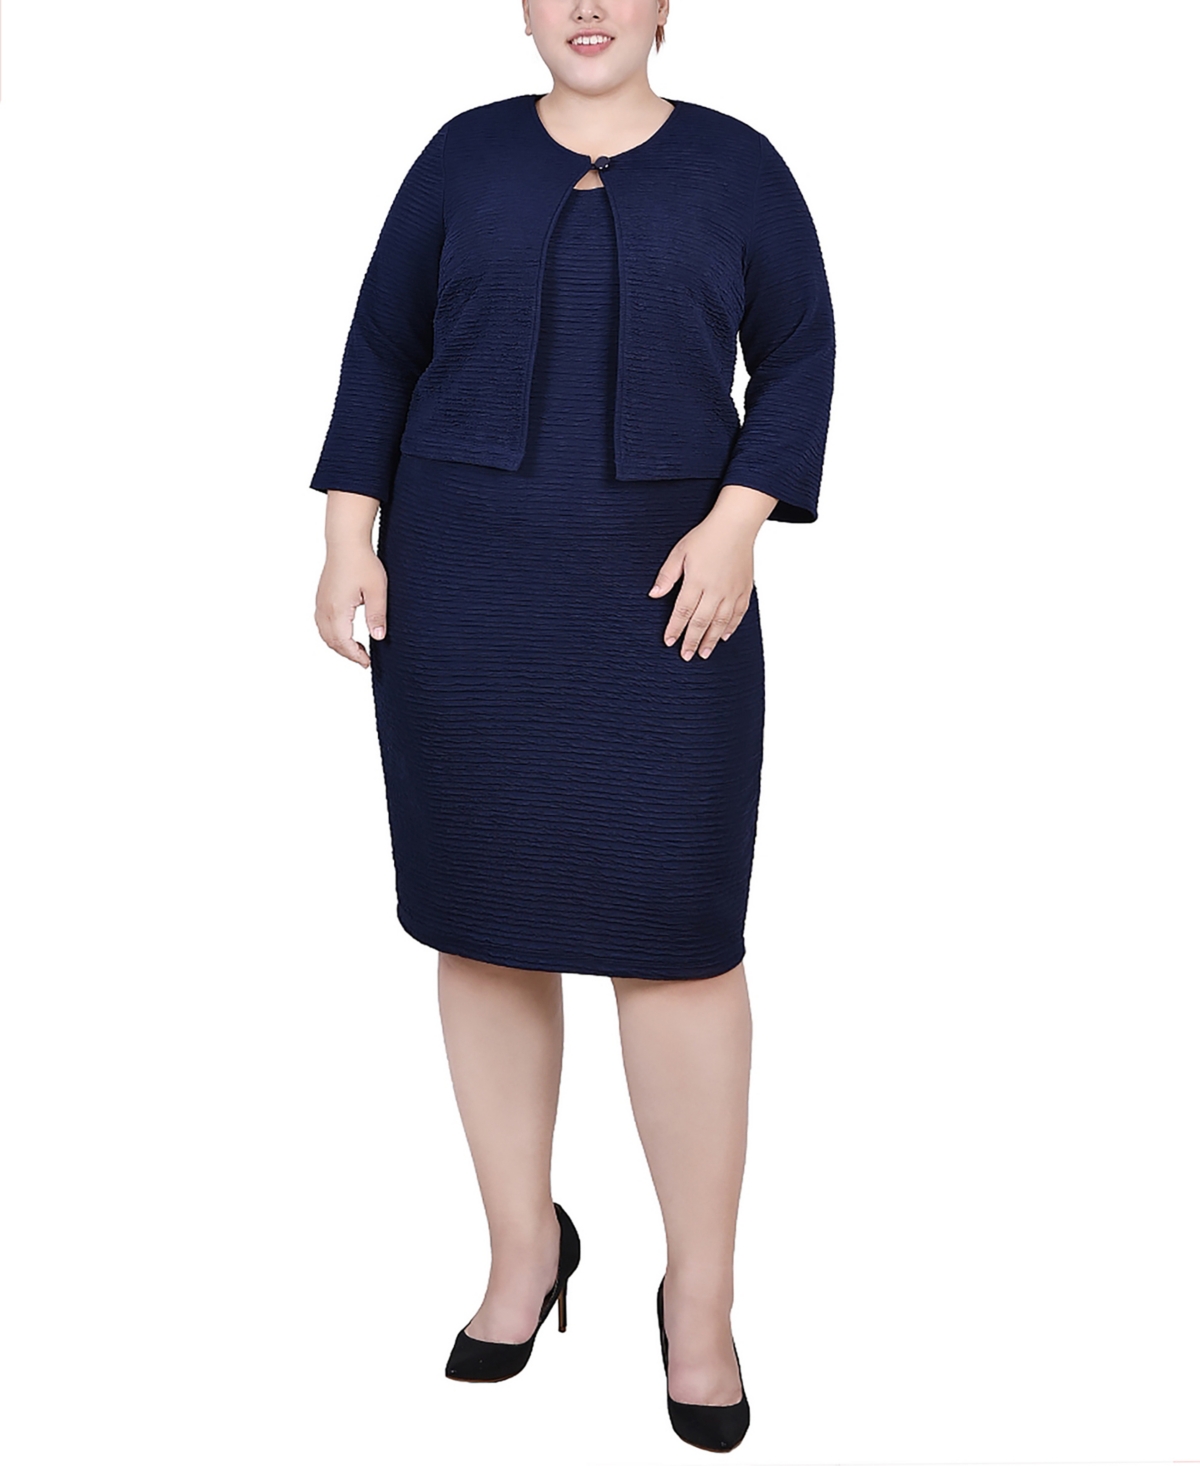 Ny Collection Plus Size Novelty Knit And Lace Dress, 2 Piece Set In Navy